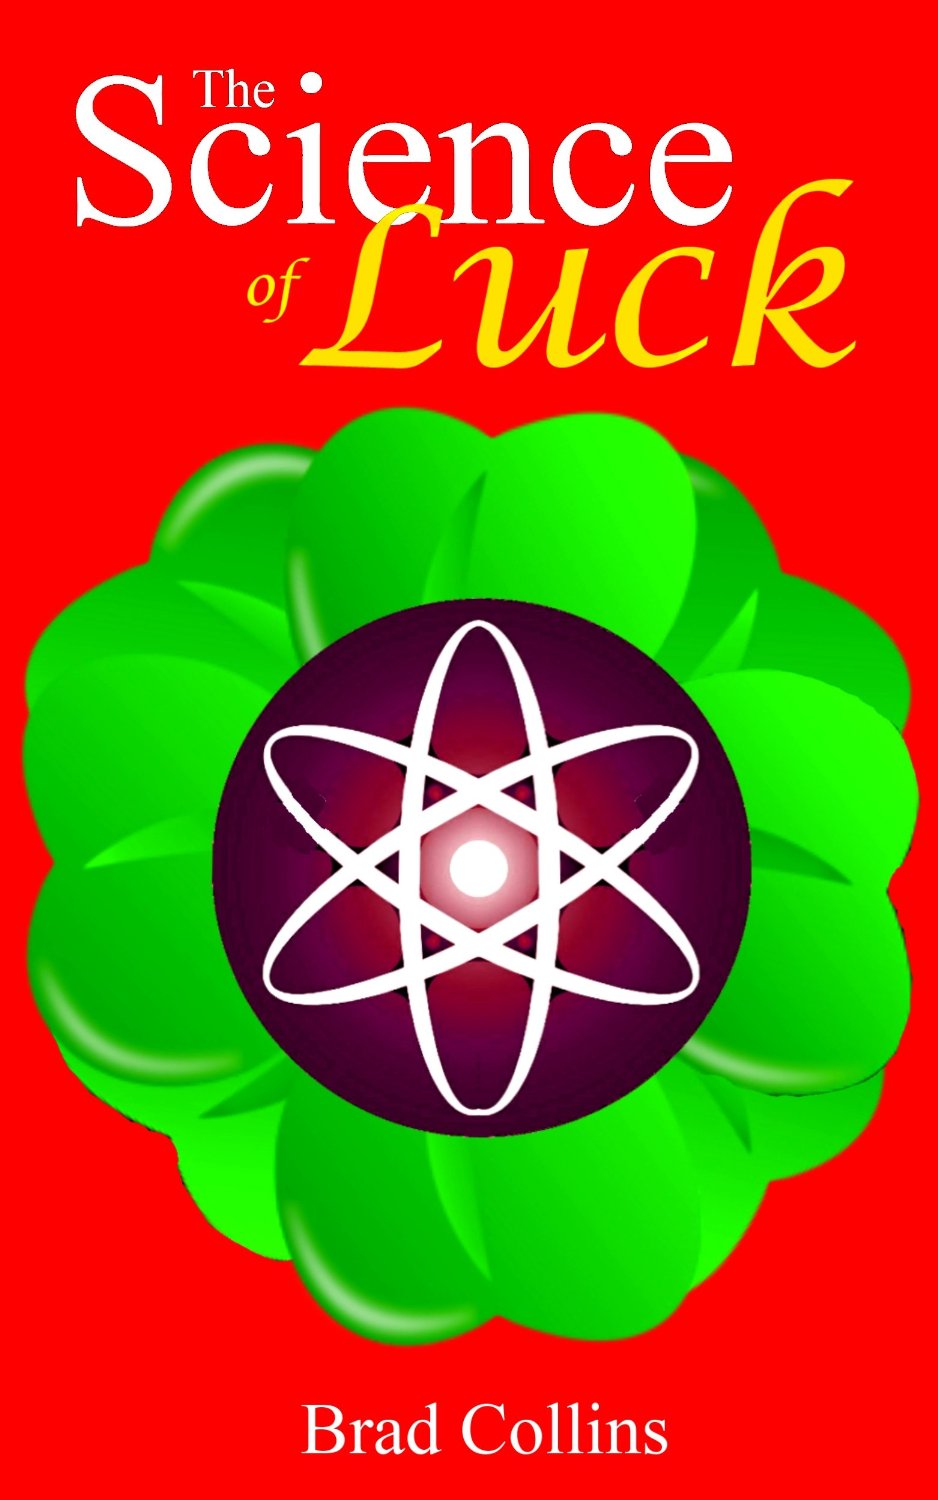 The Science of Luck – The Ultimate Guide to Create Luck Scientifically in Life by Brad Collins